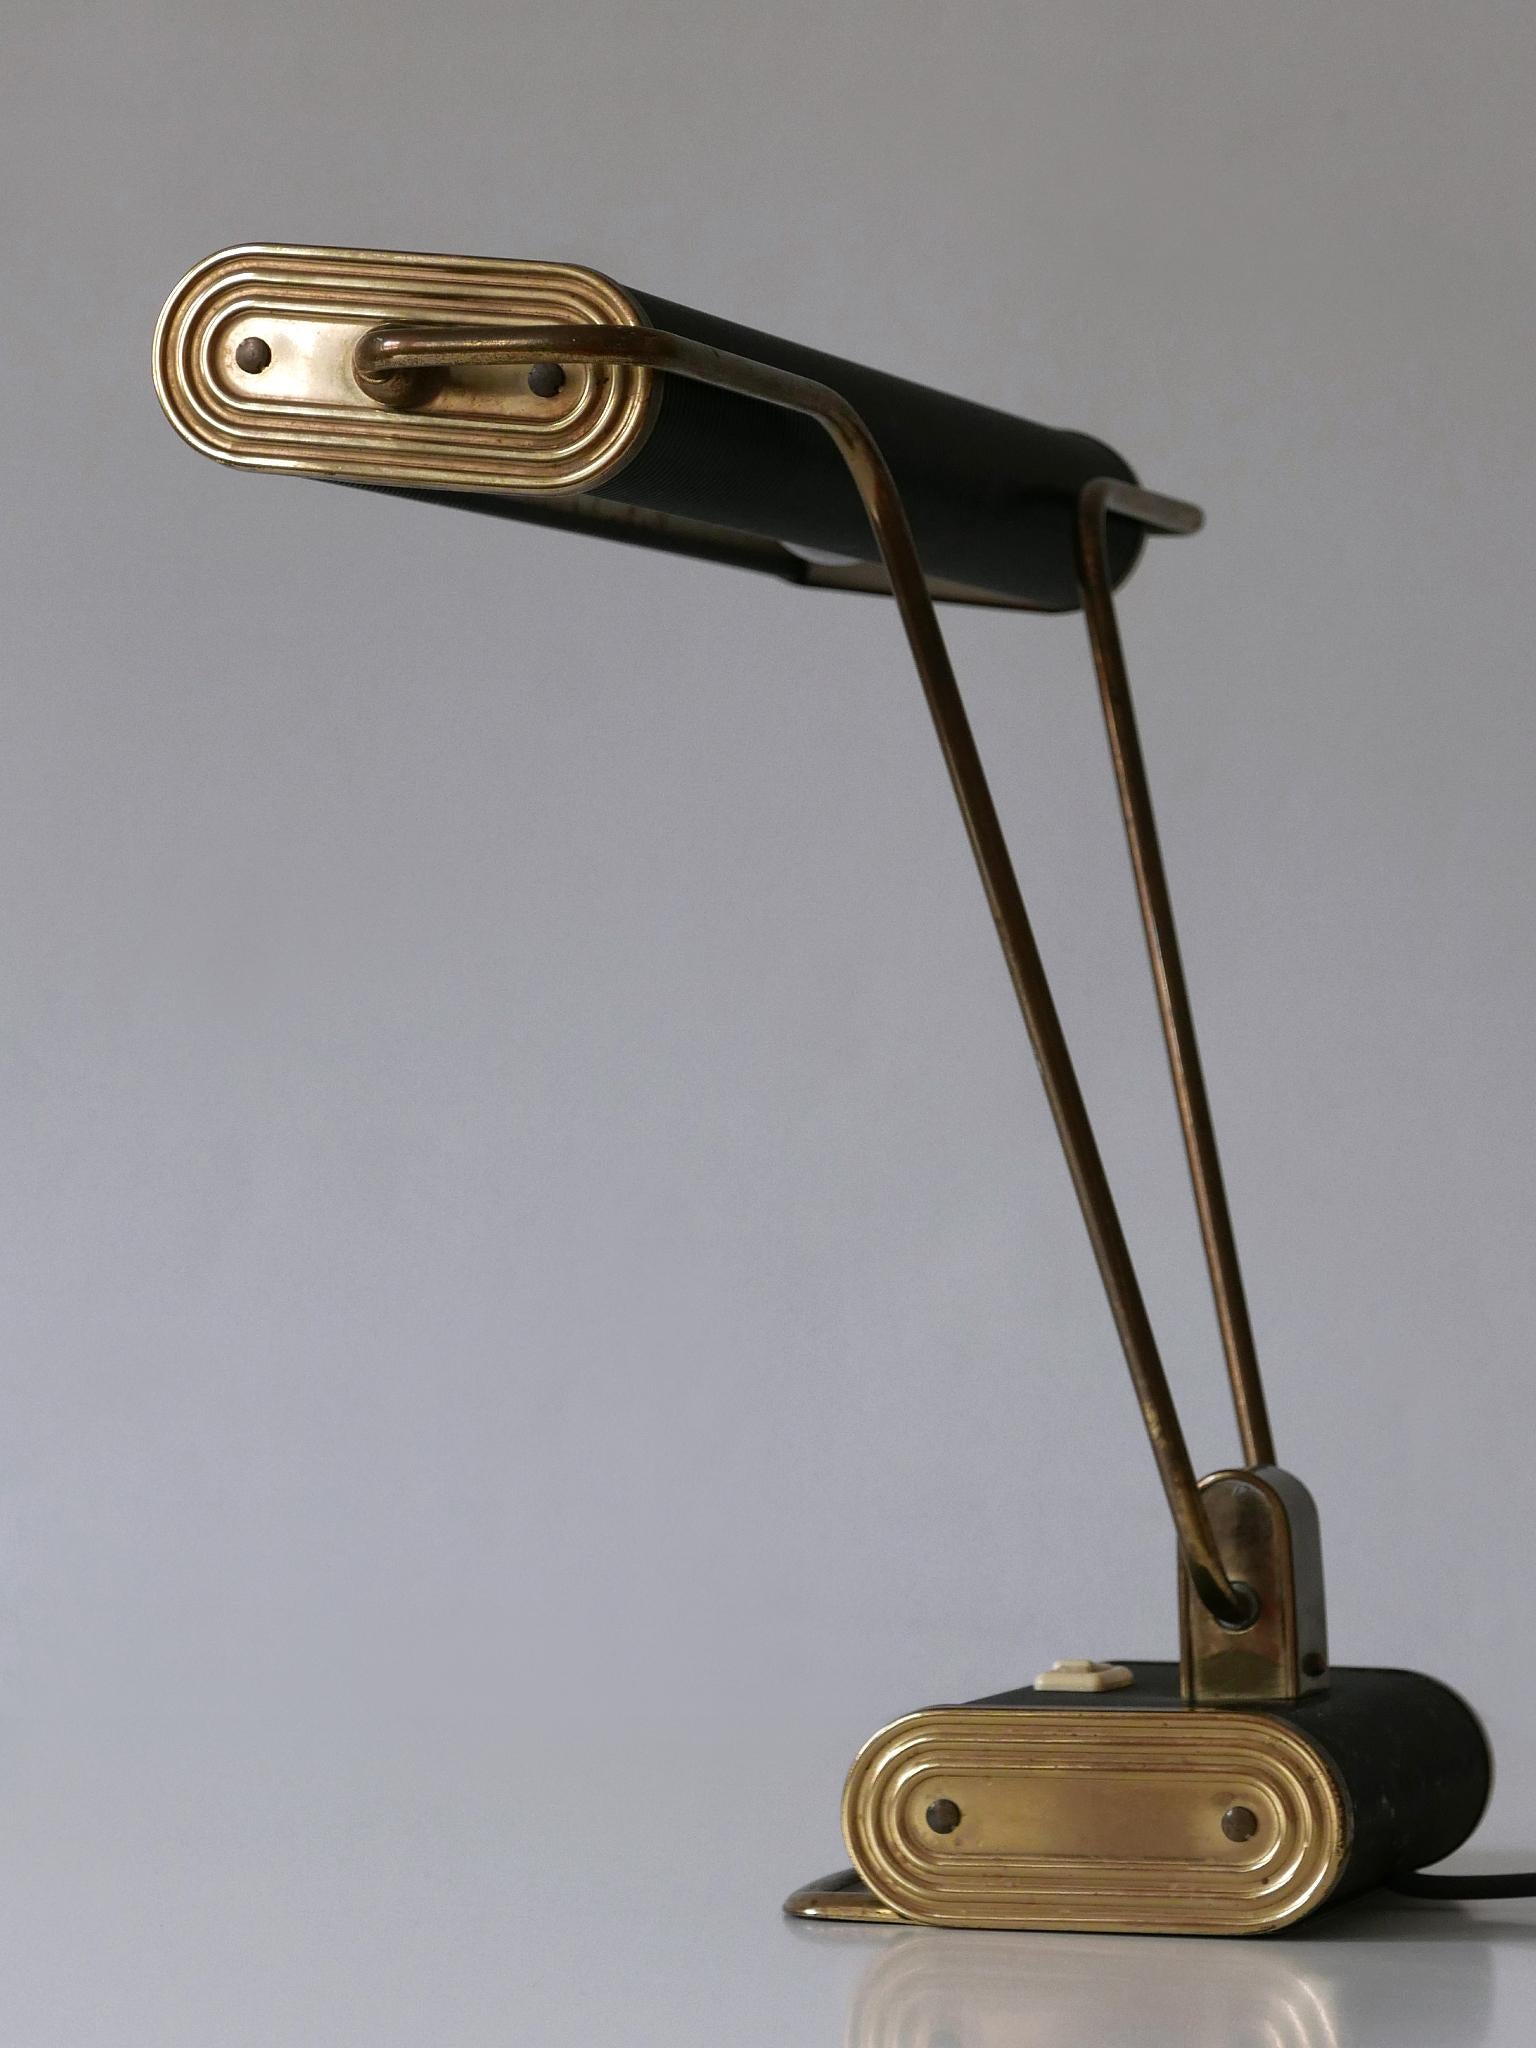 Metal Art Deco Table Lamp or Desk Light 'No 71' by André Mounique for Jumo 1930s For Sale